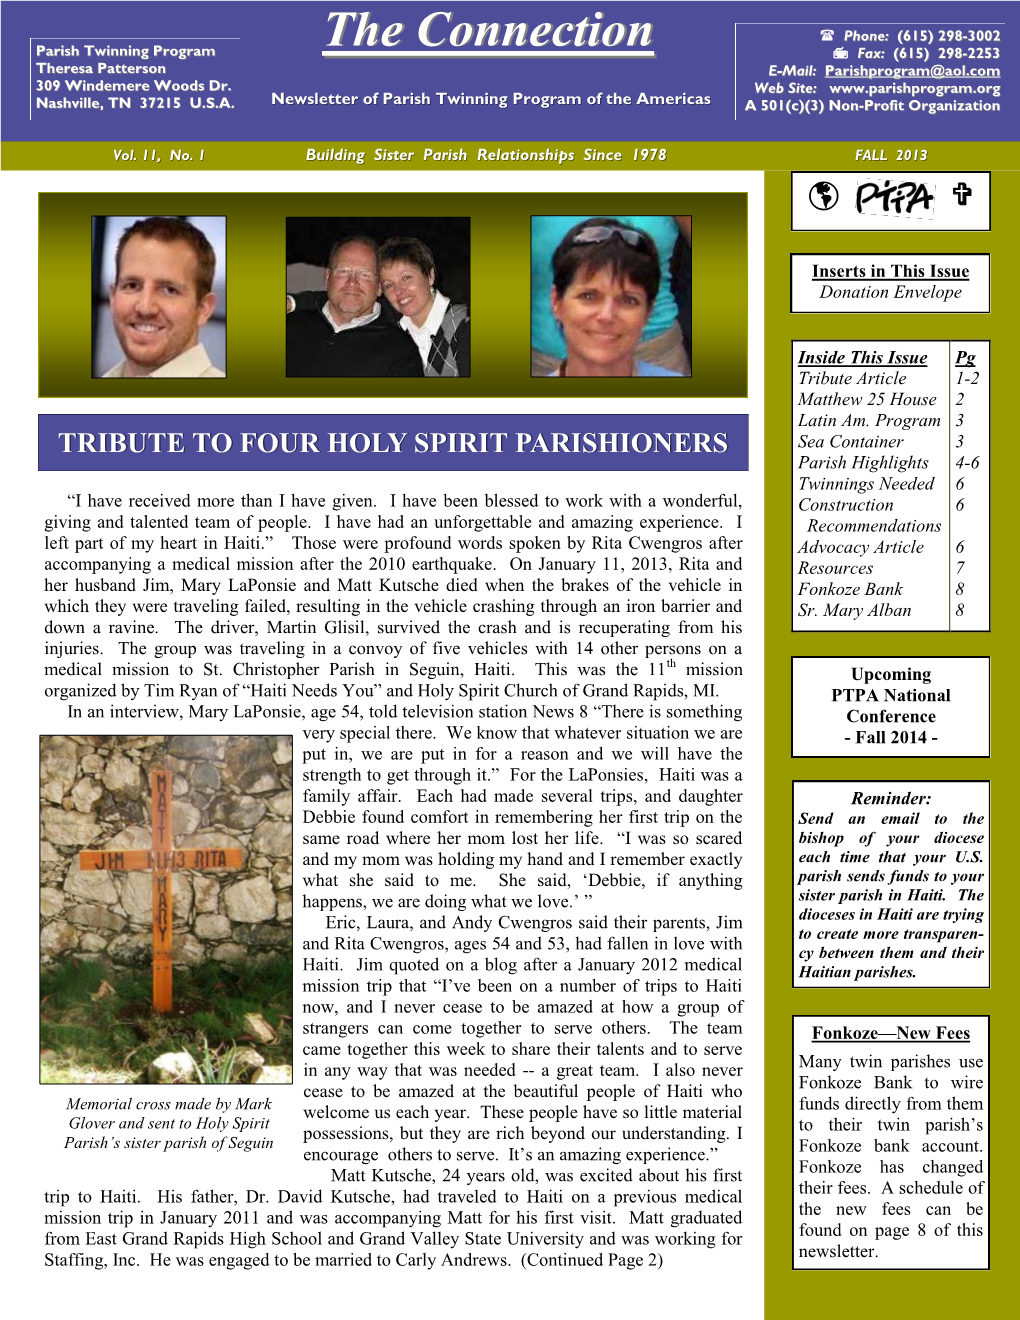 Connection Newsletter – Fall 2013